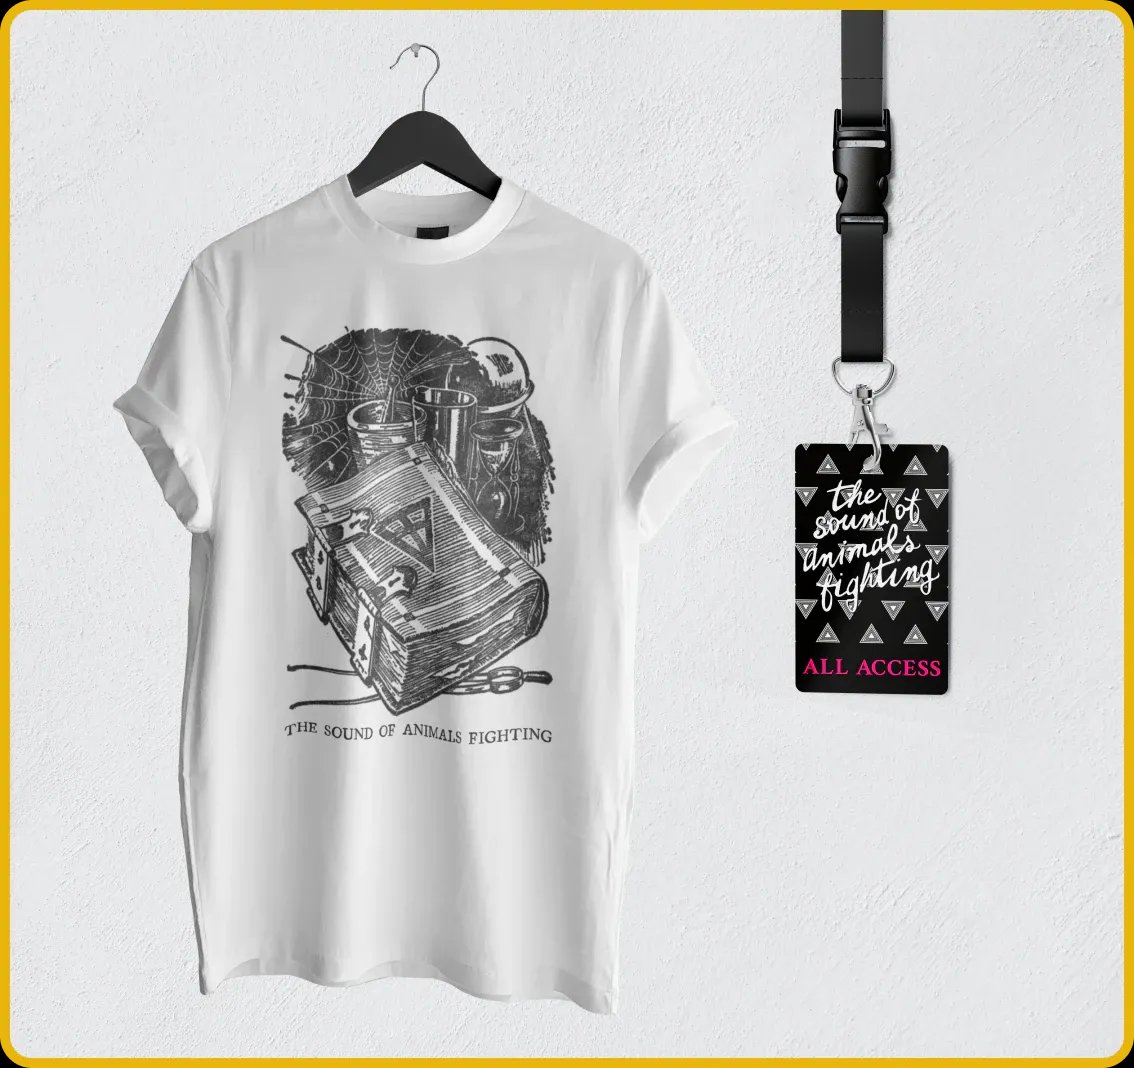 Image of a white tshirt and a lanyard pass on white background.